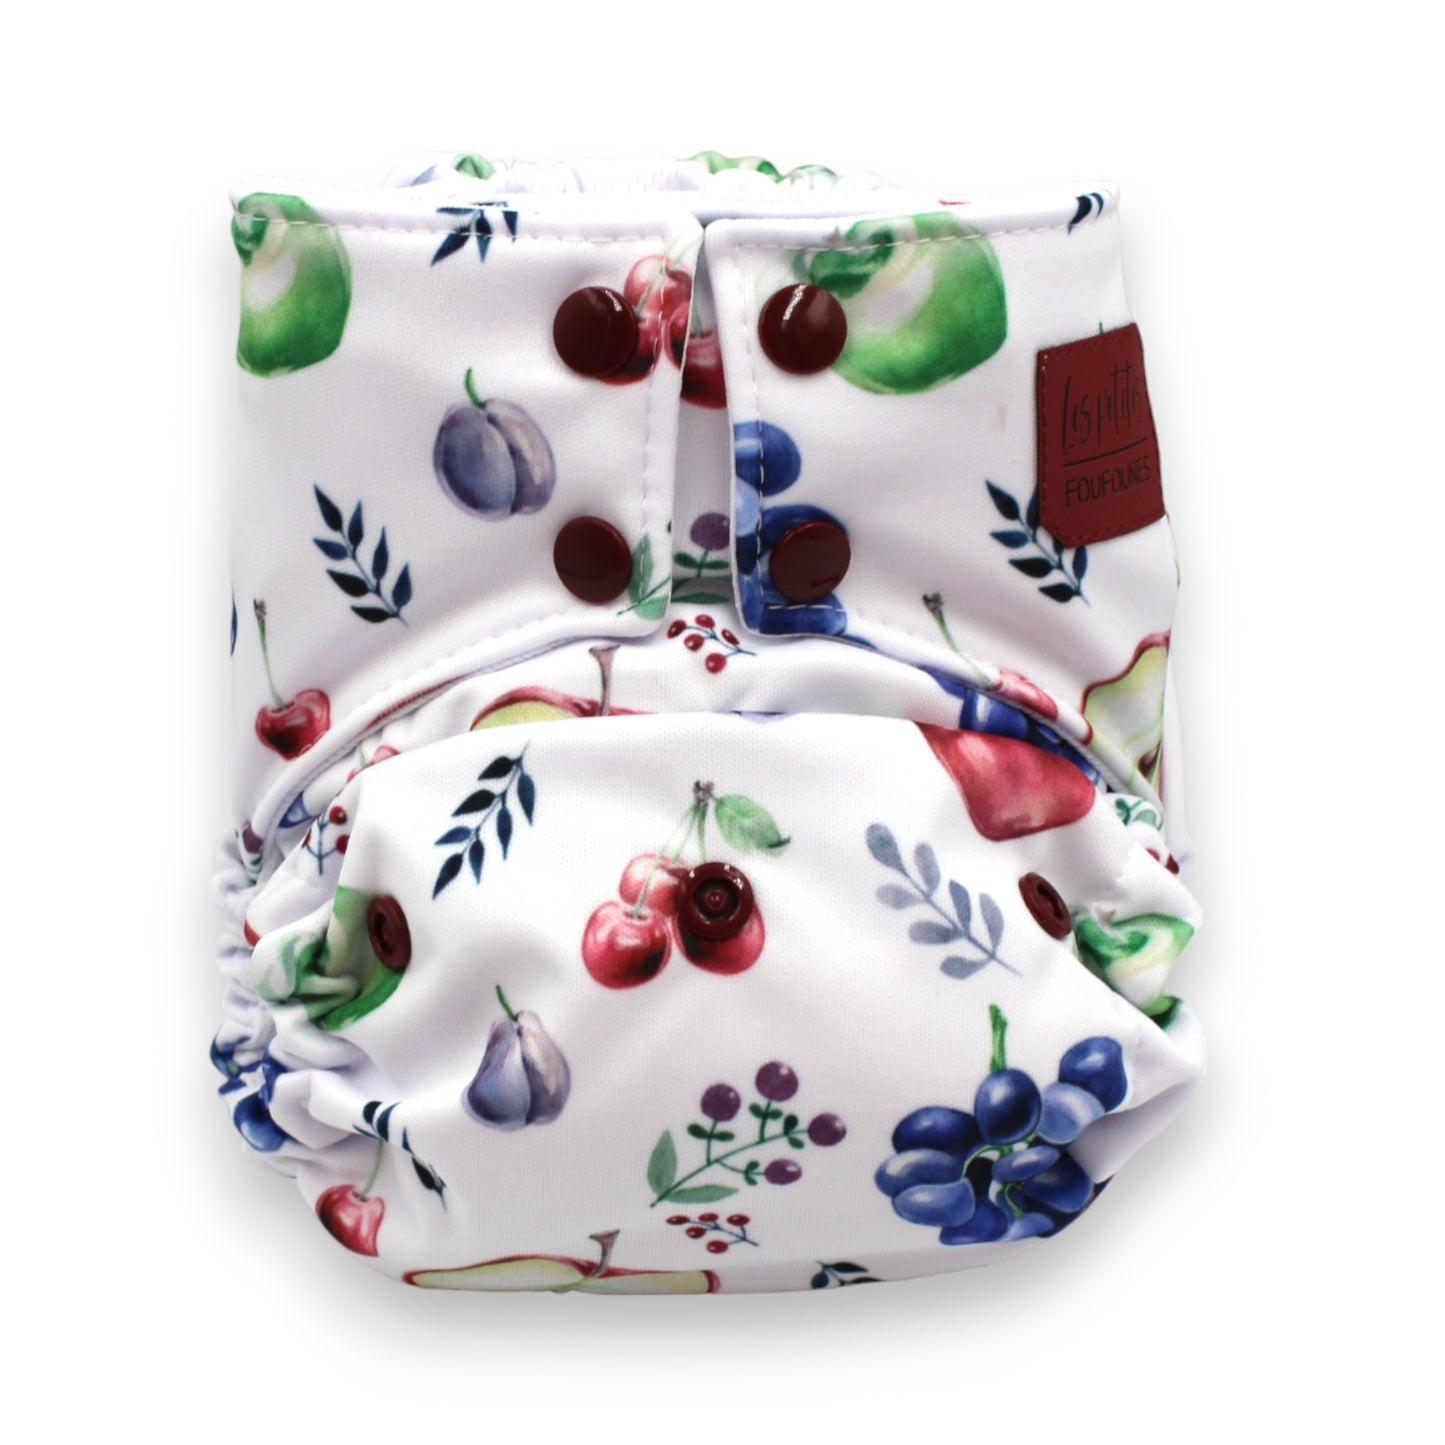 Couches - Petits fruits FP (7284317880457)